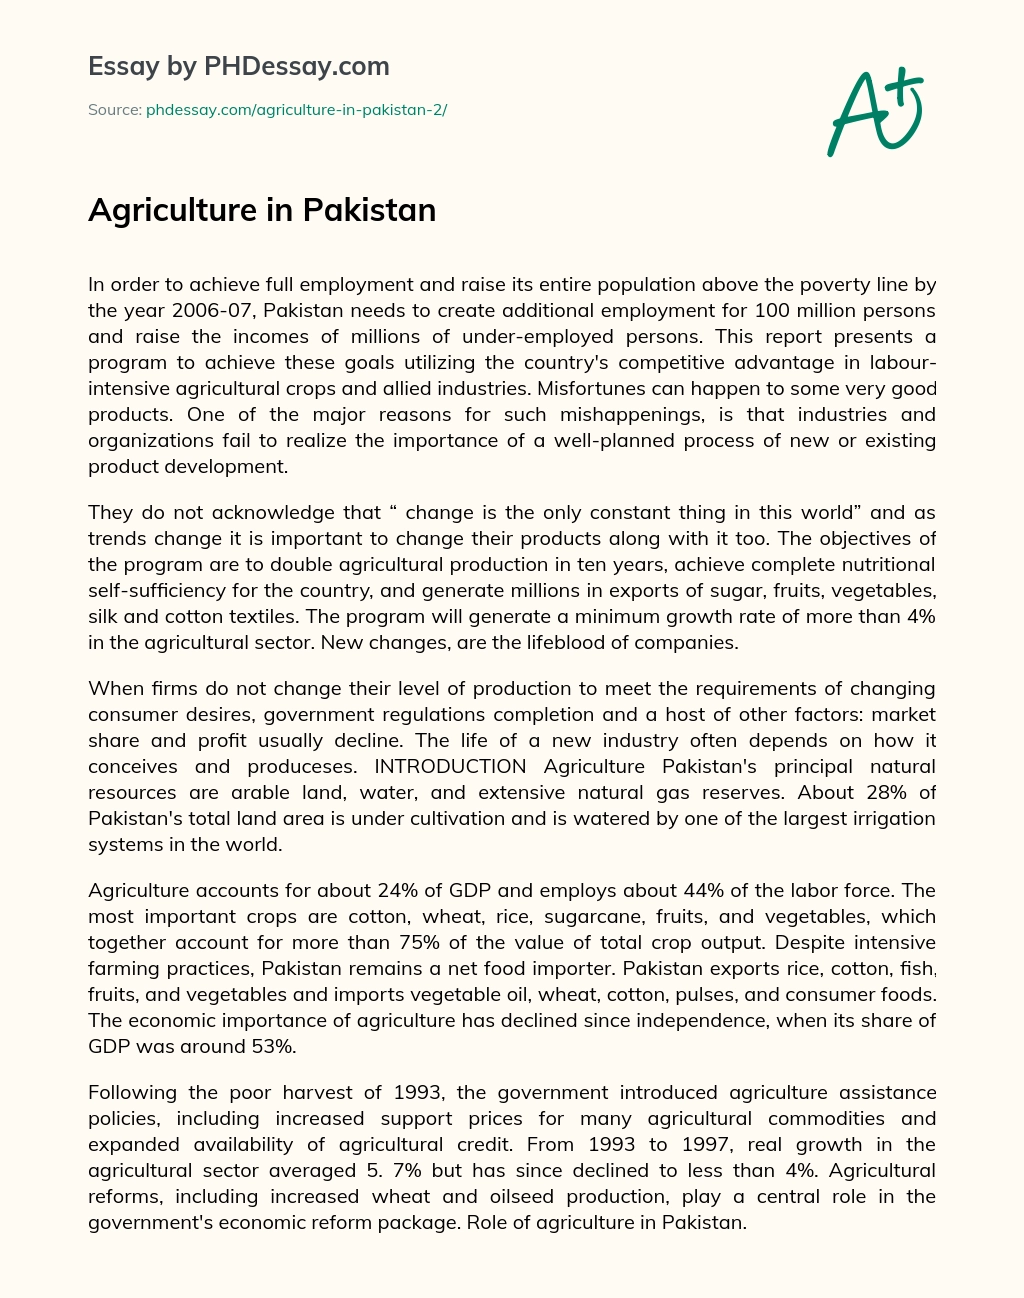 short essay on agriculture in pakistan